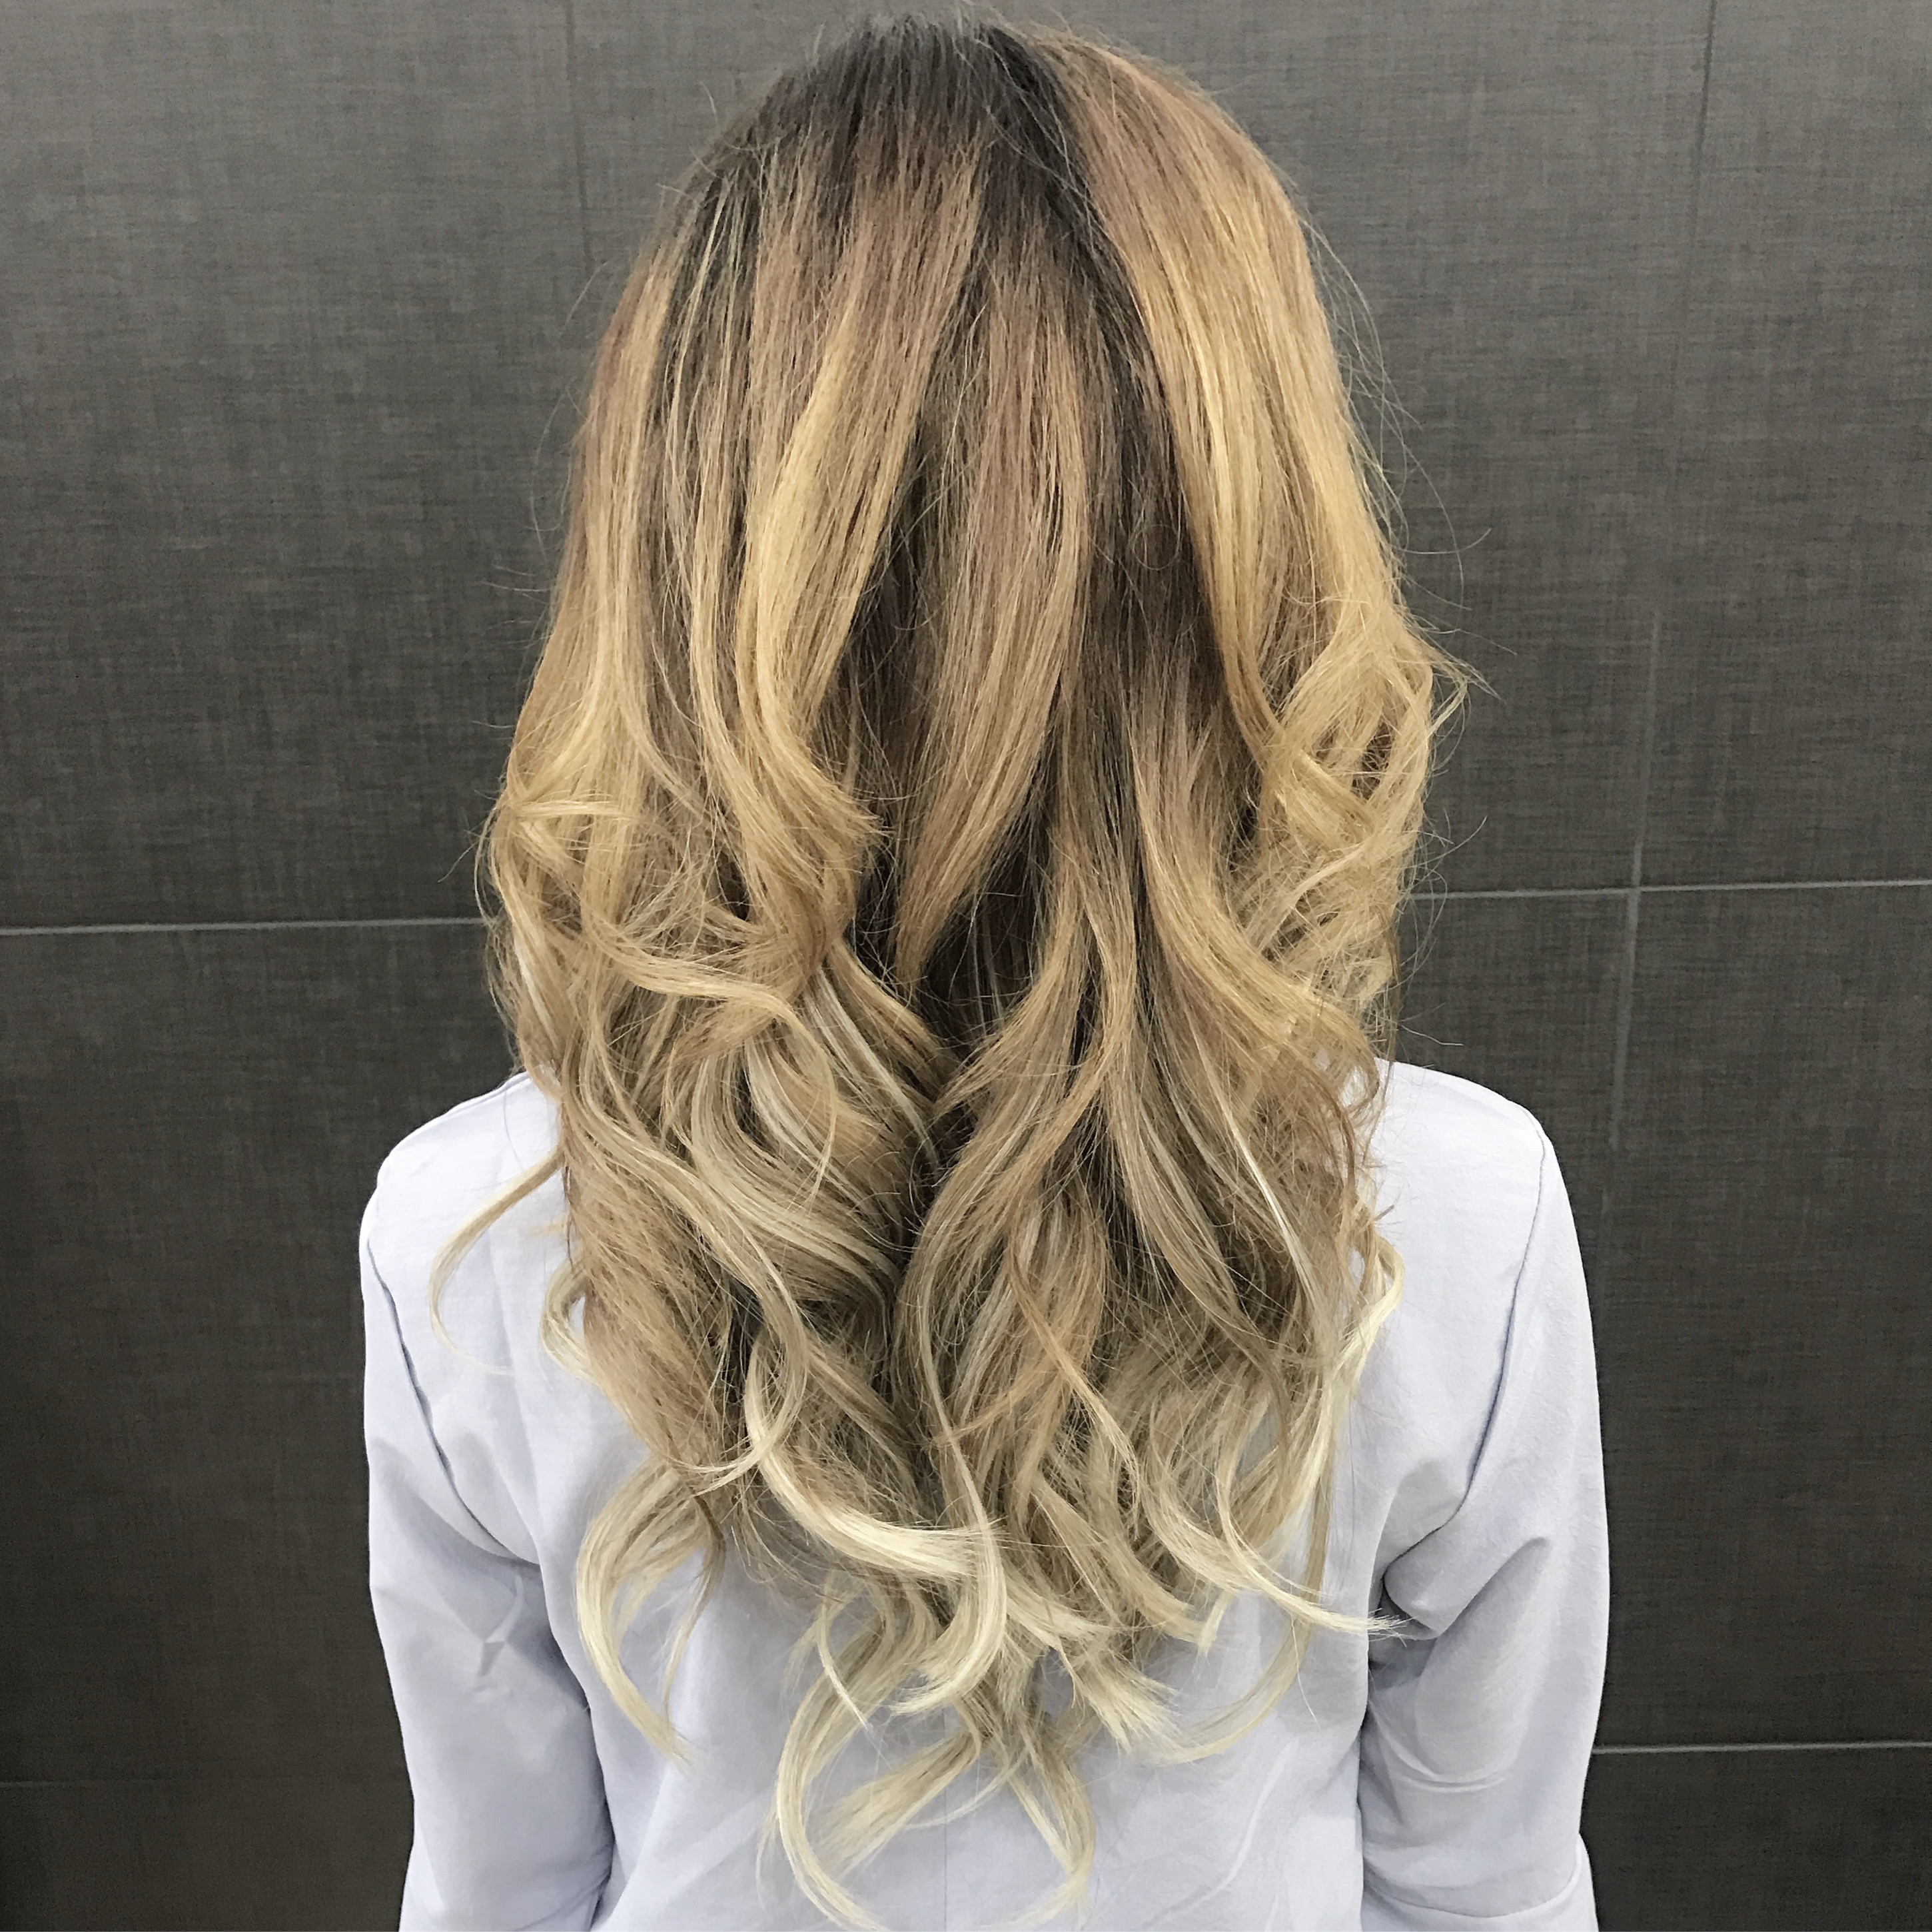 How To Tone Brassy Hair Between Salon Visits Style Context